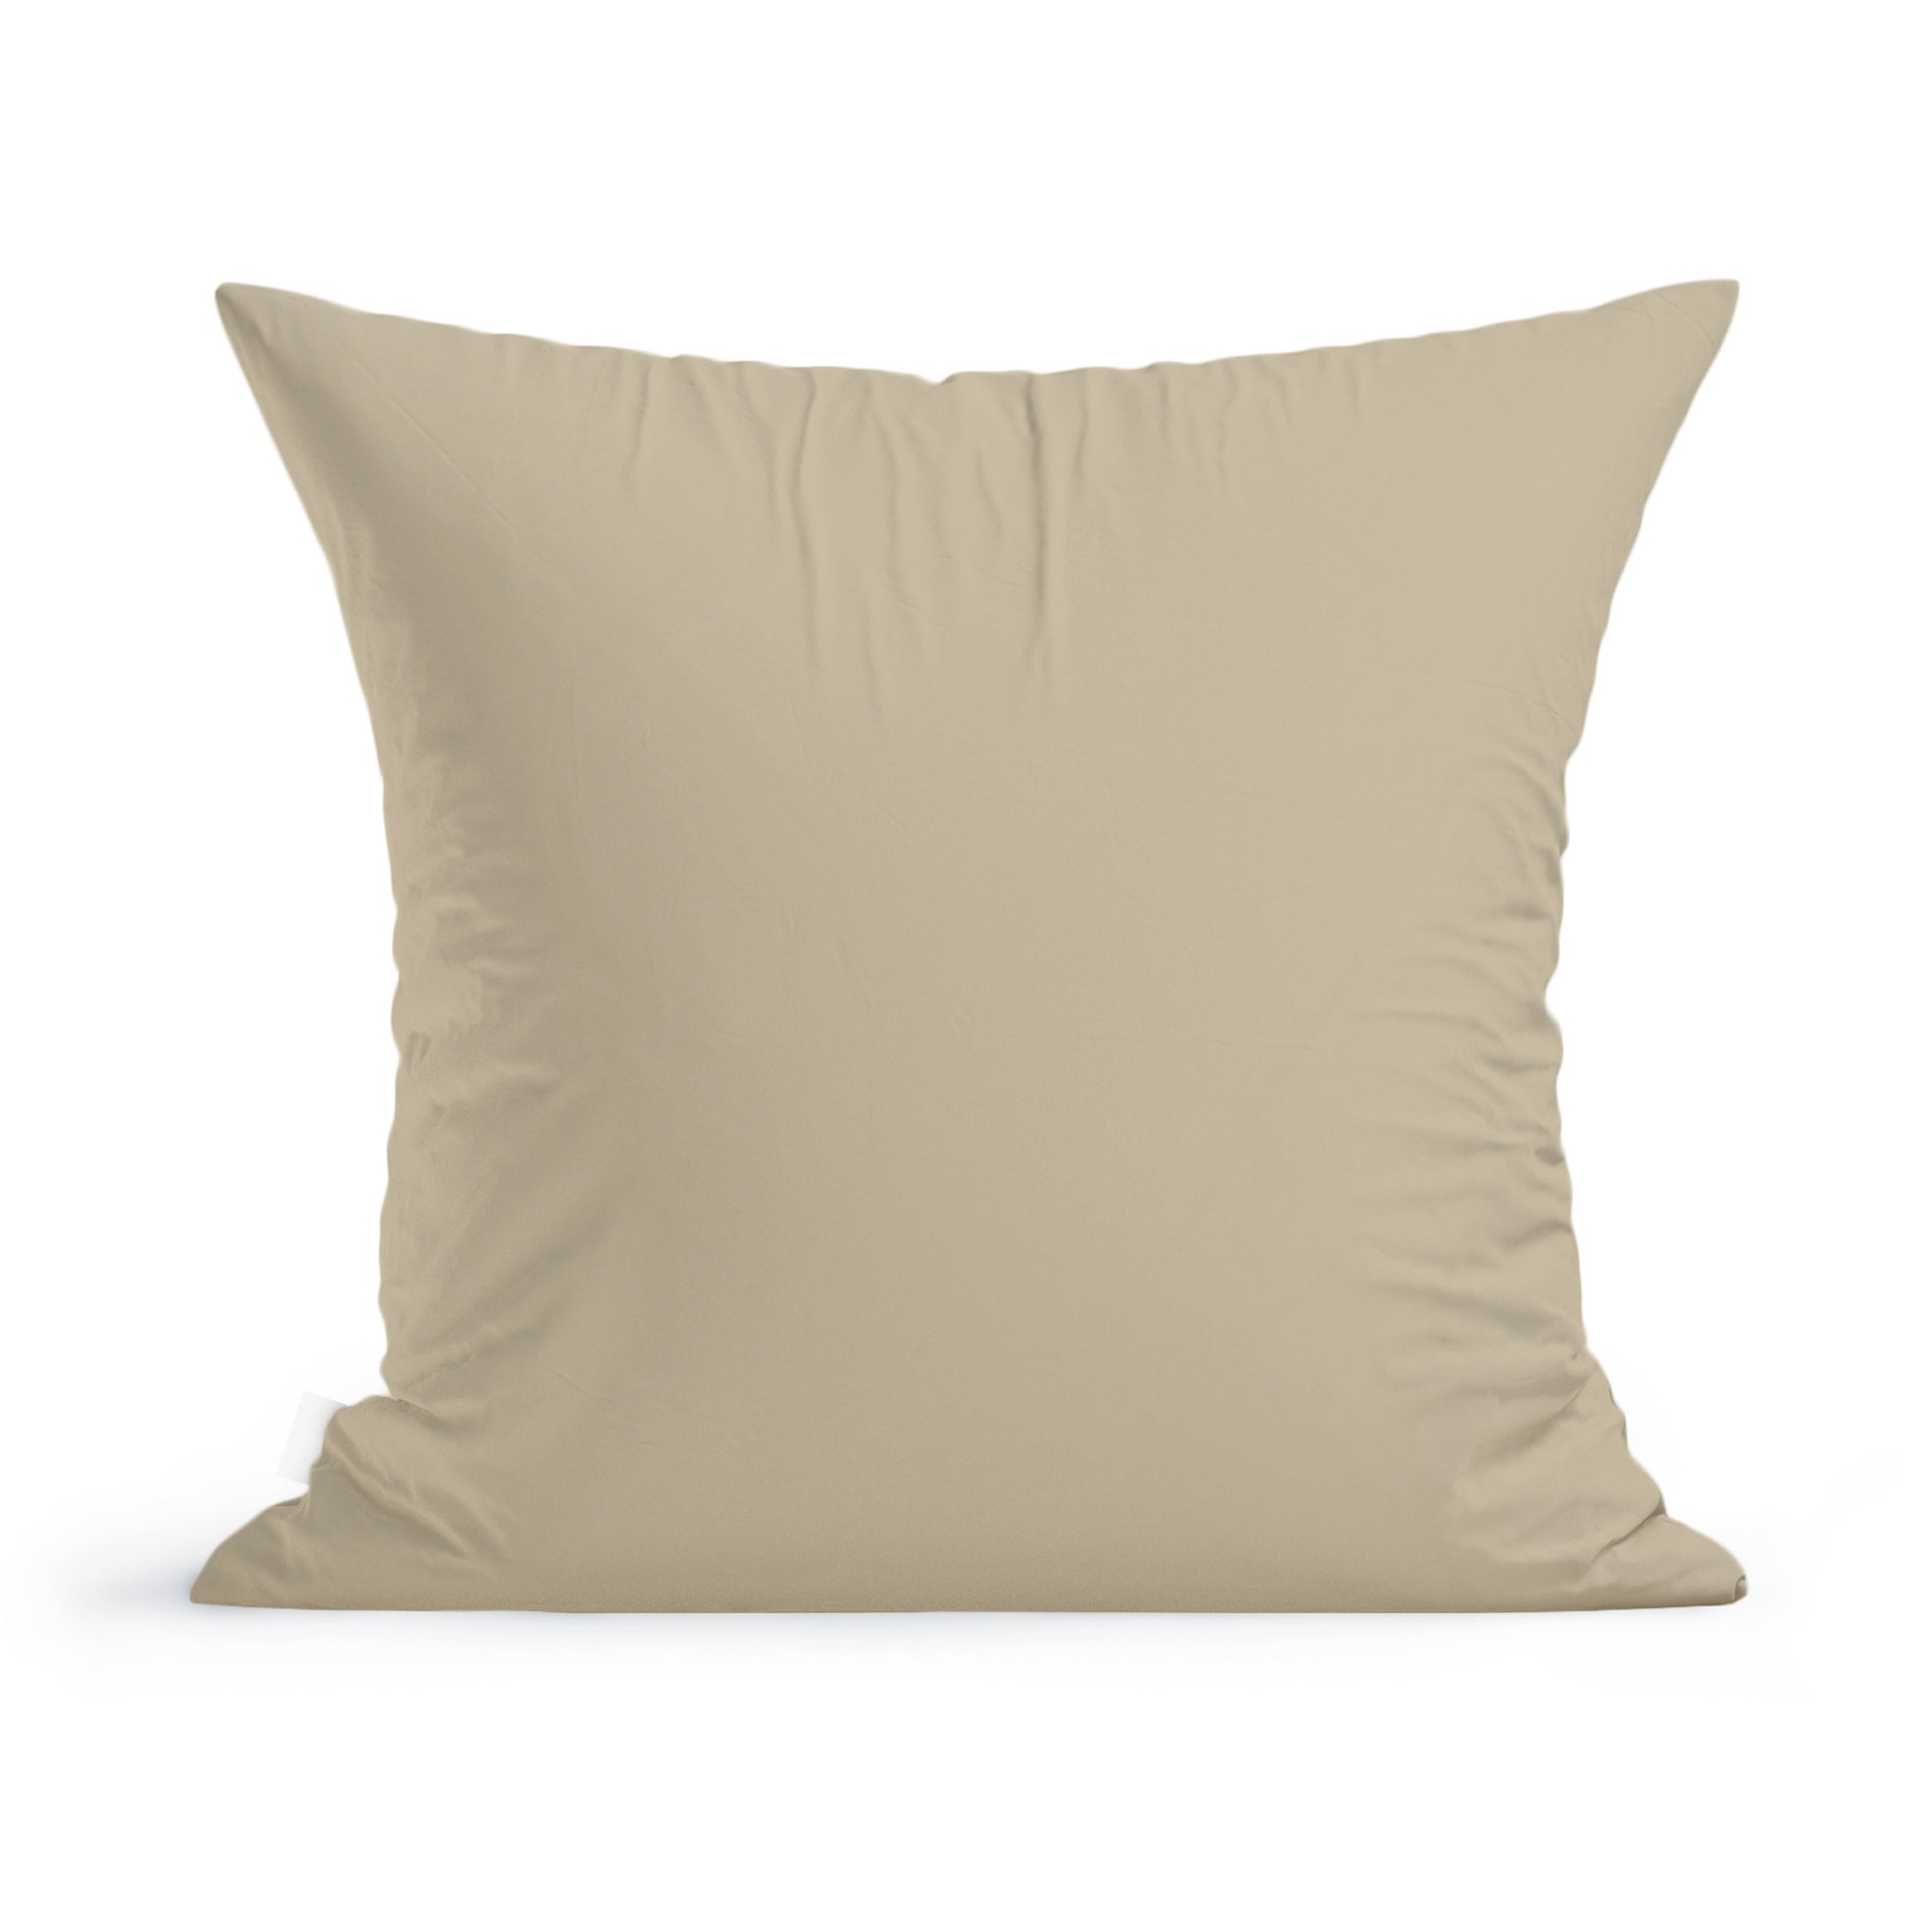 A plain beige cotton Fresh Florals Pillow by Rustic County isolated on a white background, showing slight creases on the surface, depicting a soft and comfortable texture.